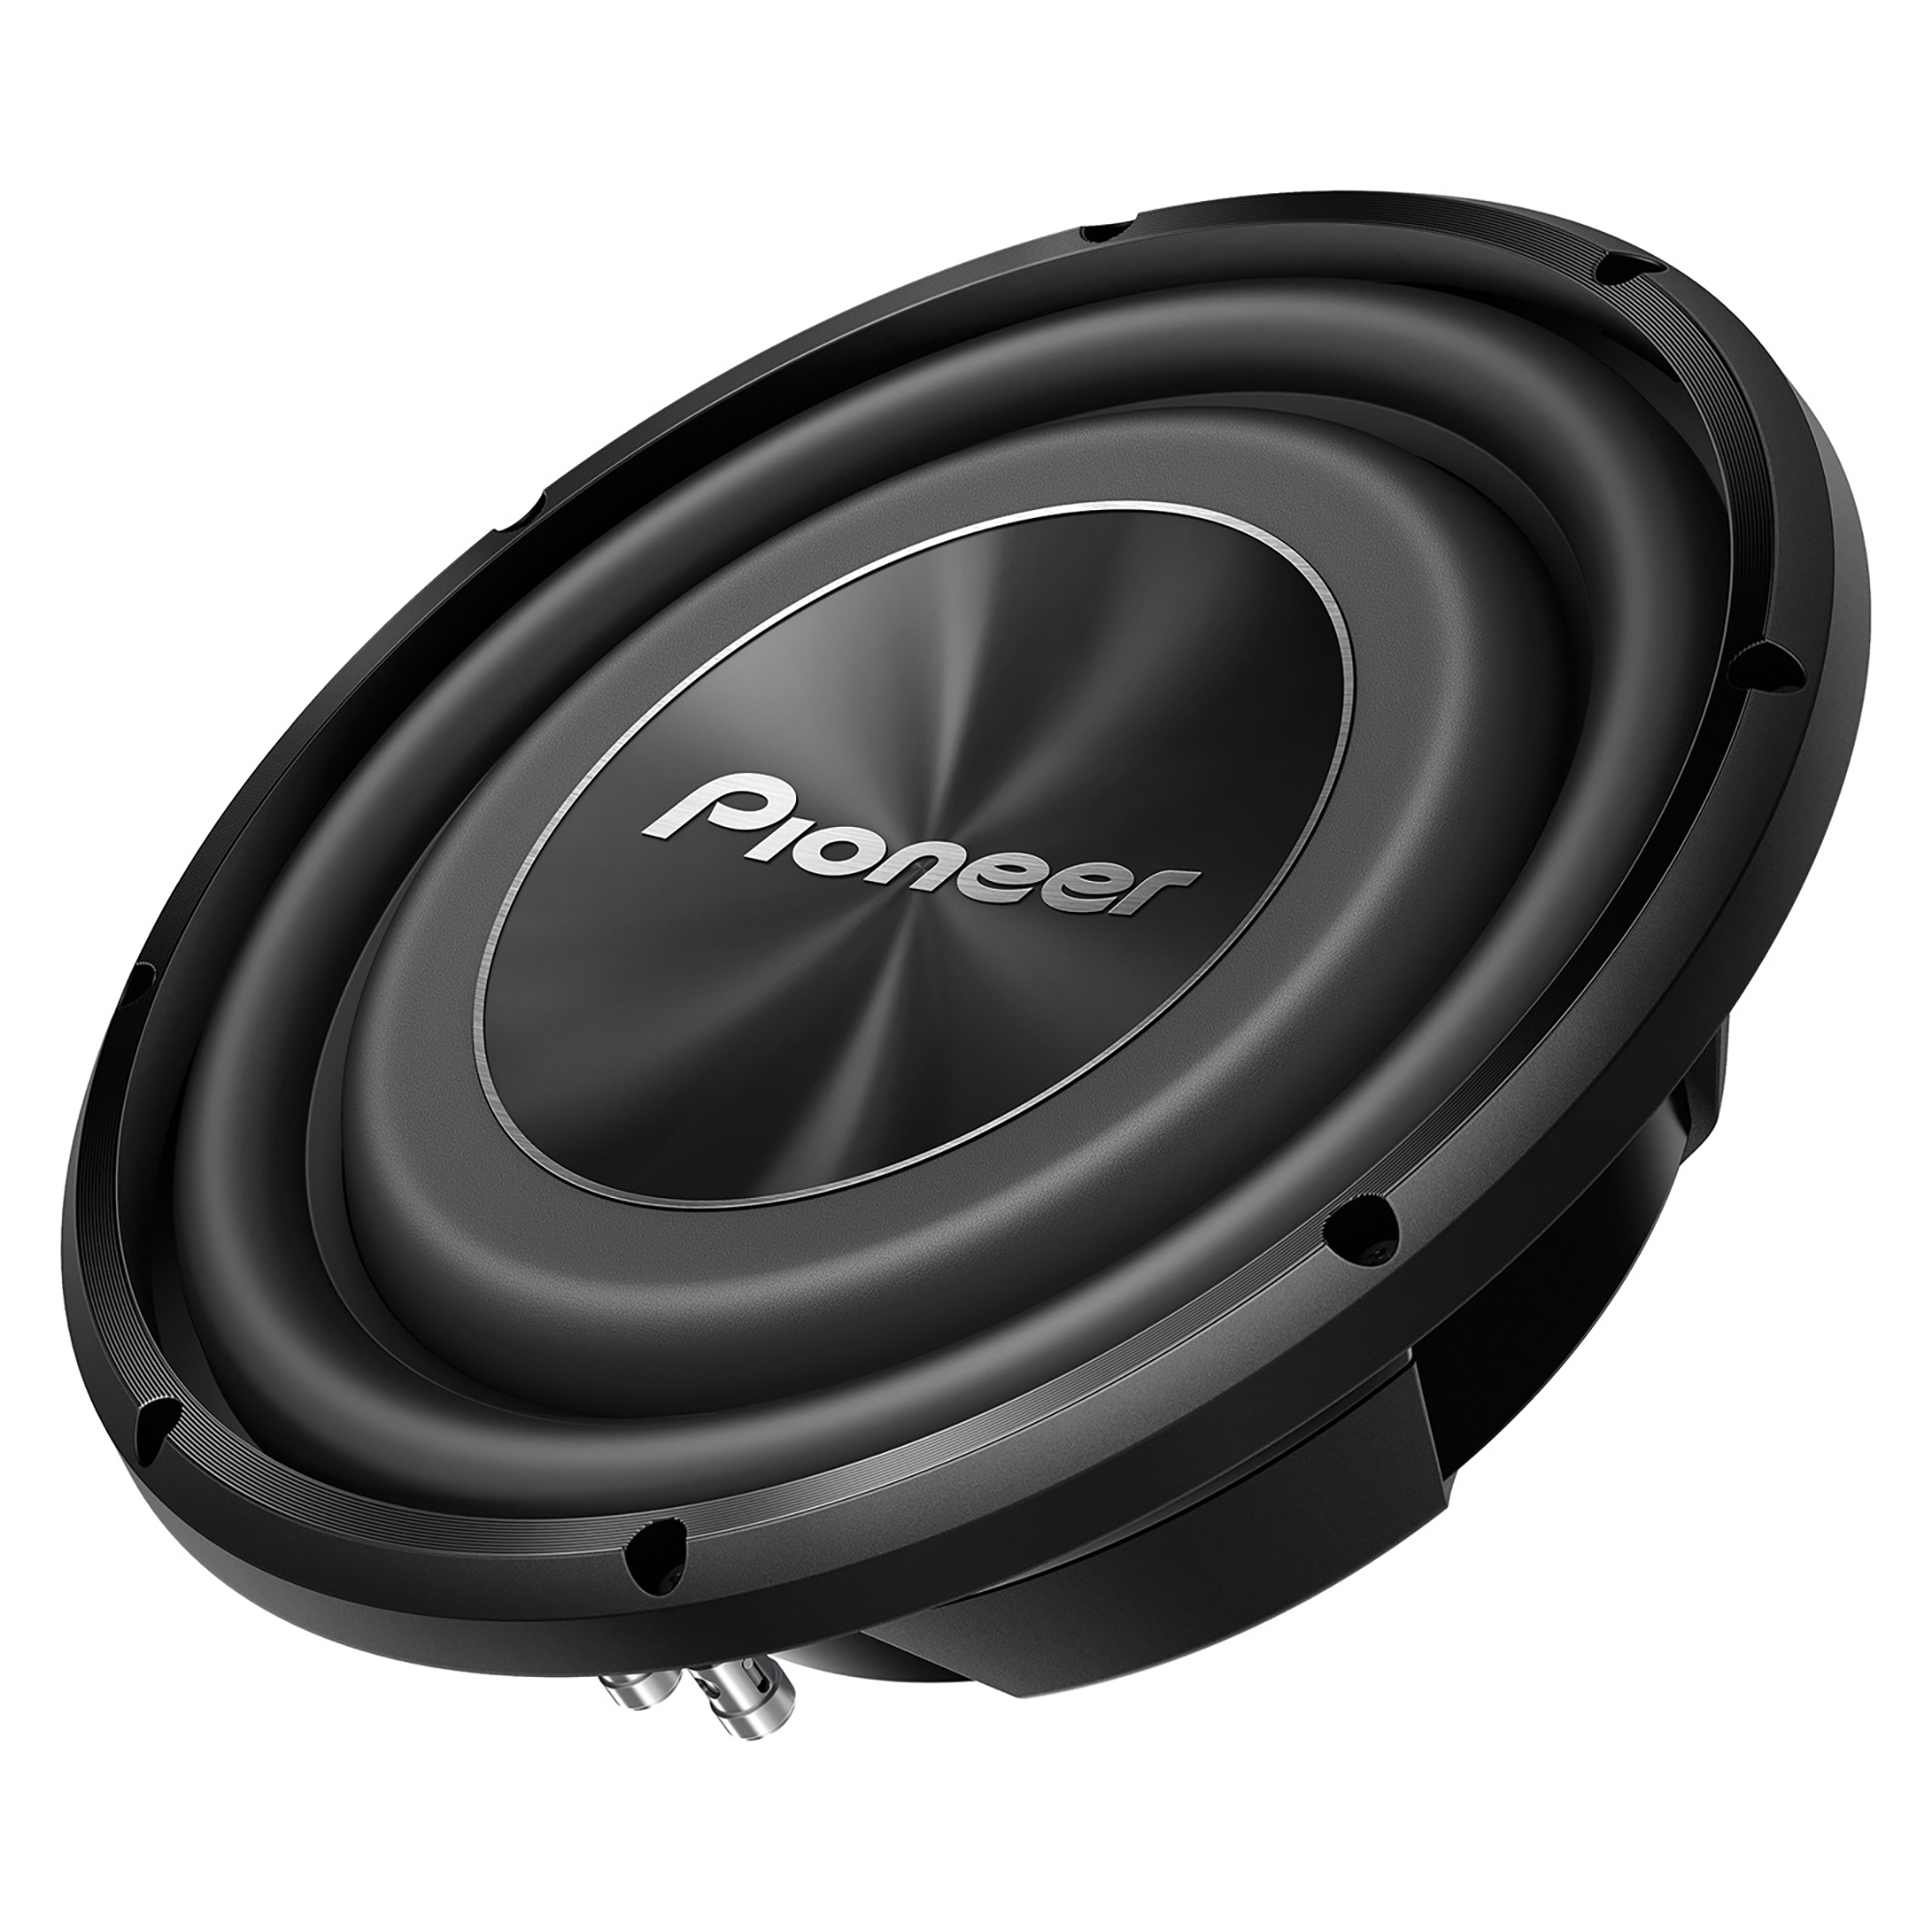 Pioneer A-Series, Shallow-Mount Subwoofer, Model TS-A3000LS4